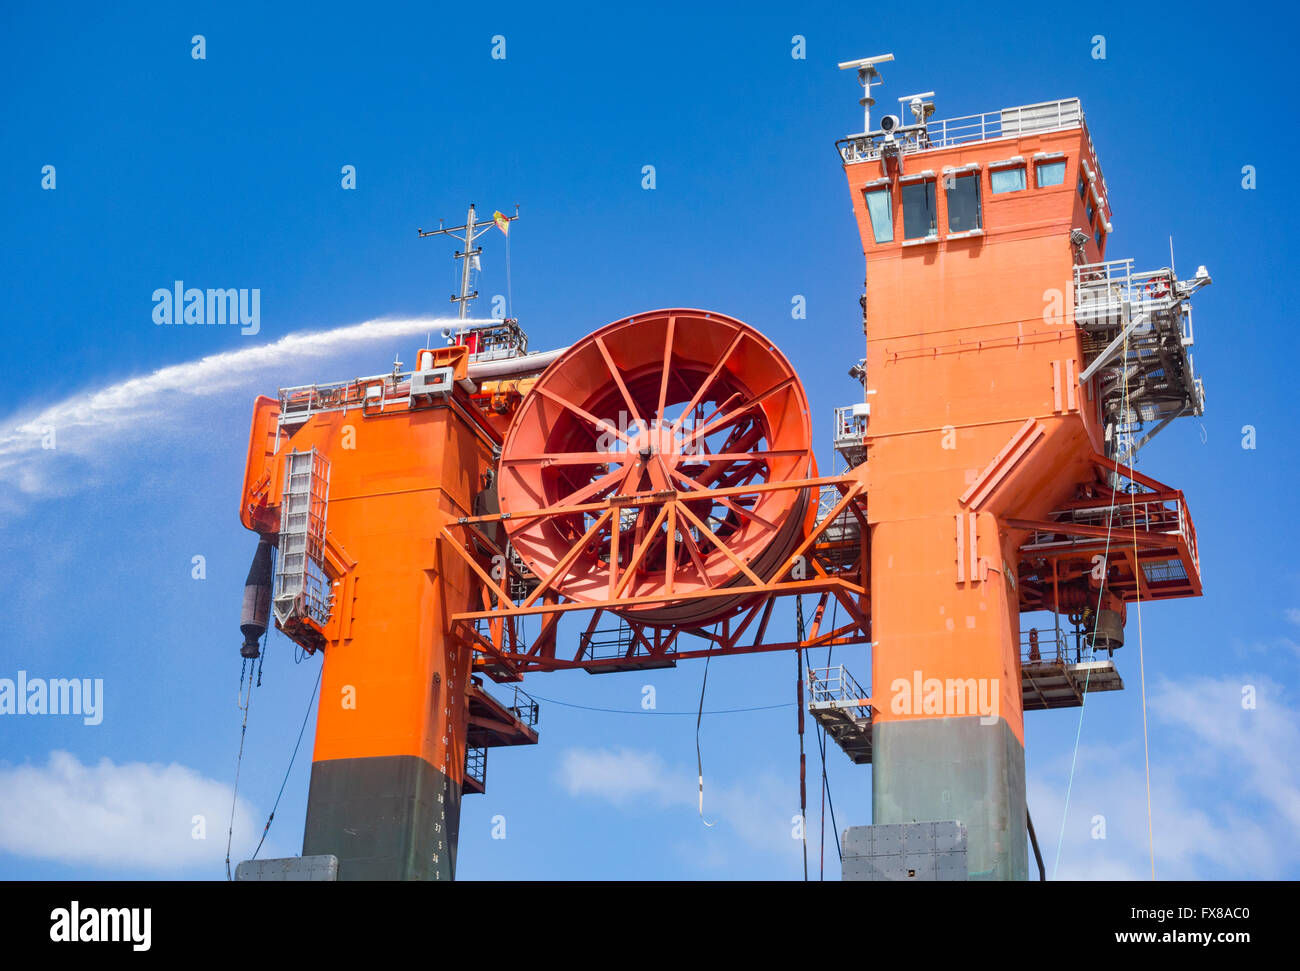 Hiload DP platform used to transfer crude products between offshore oil rigs and Tankers Stock Photo